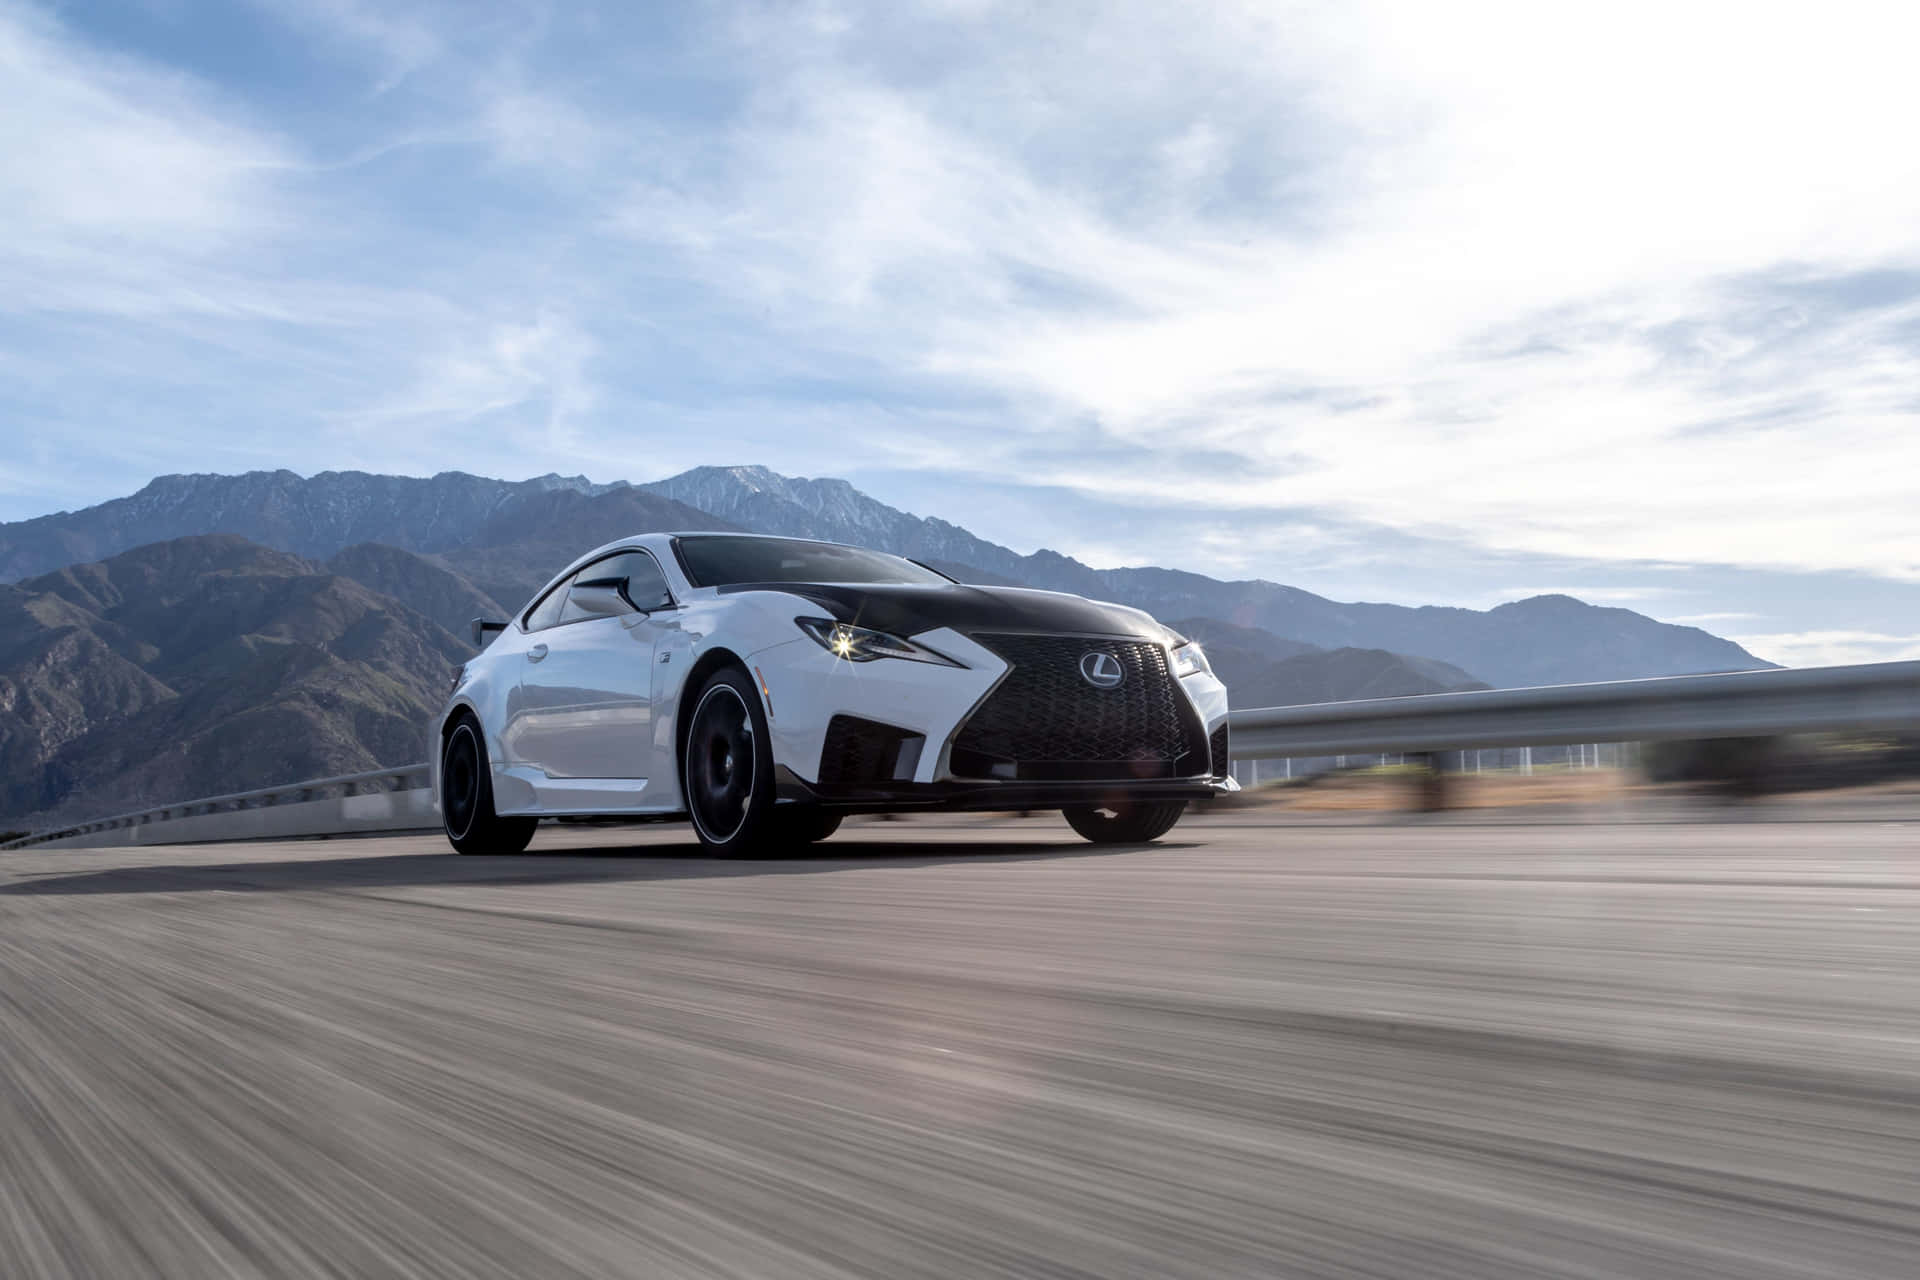 The Lexus Rc F Sports Car Driving On A Mountain Road